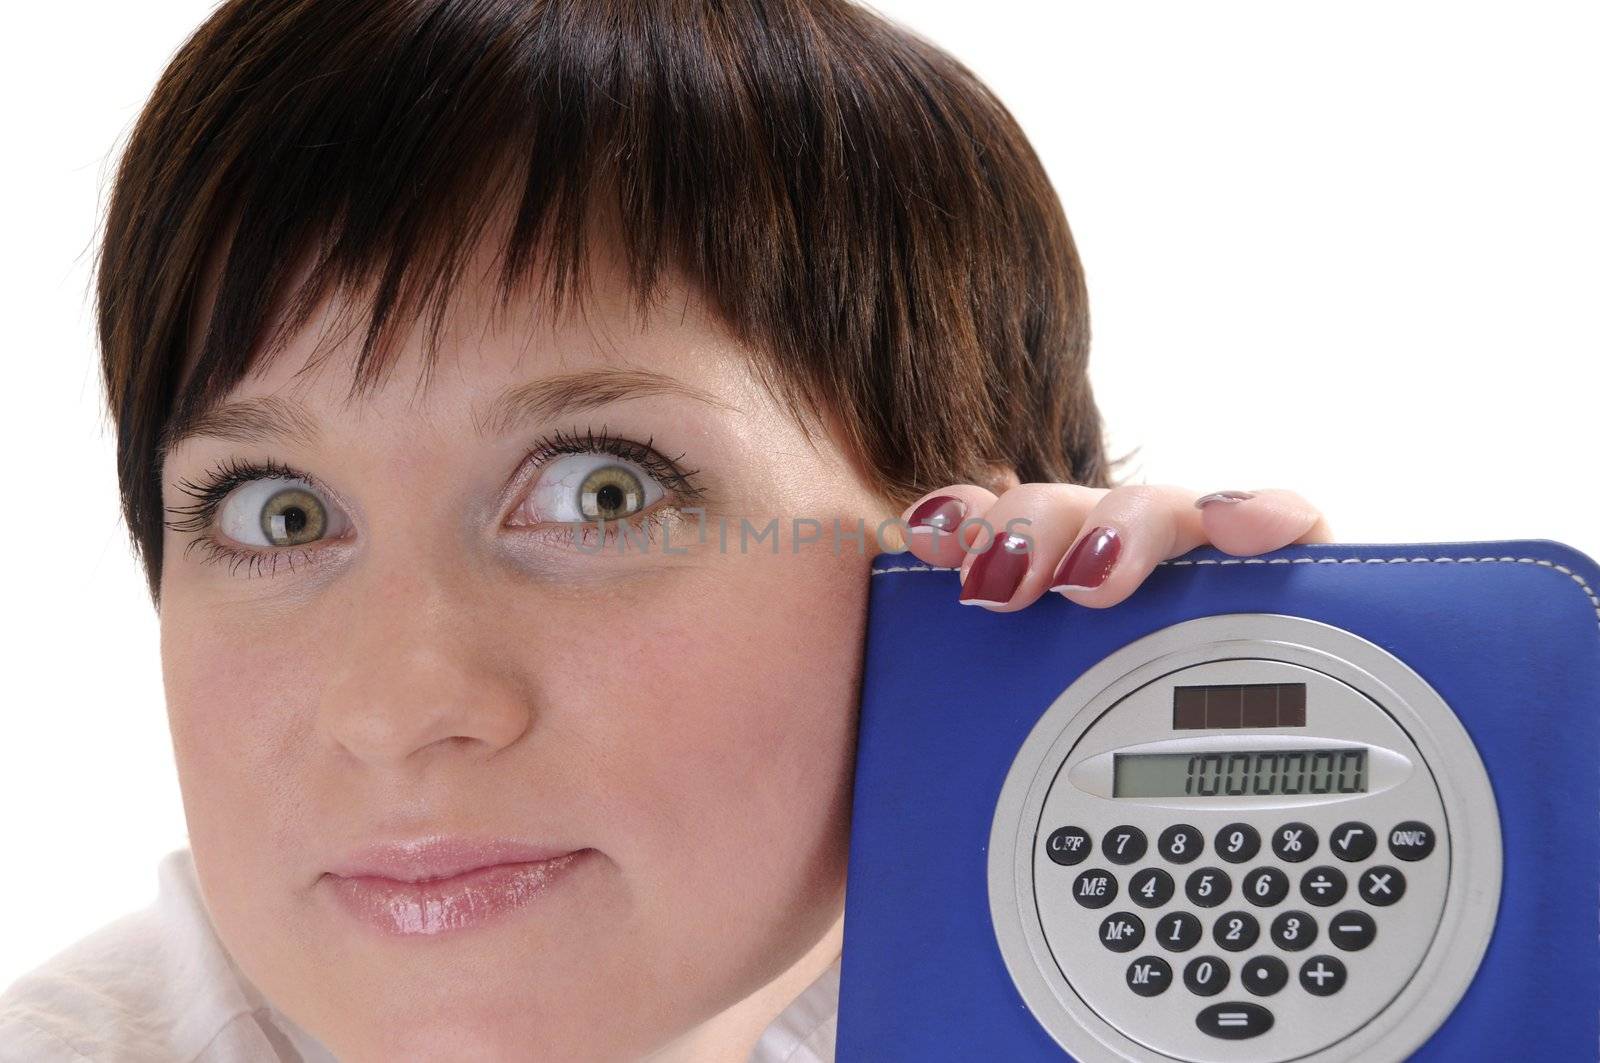 Woman holds calculator with million number on it